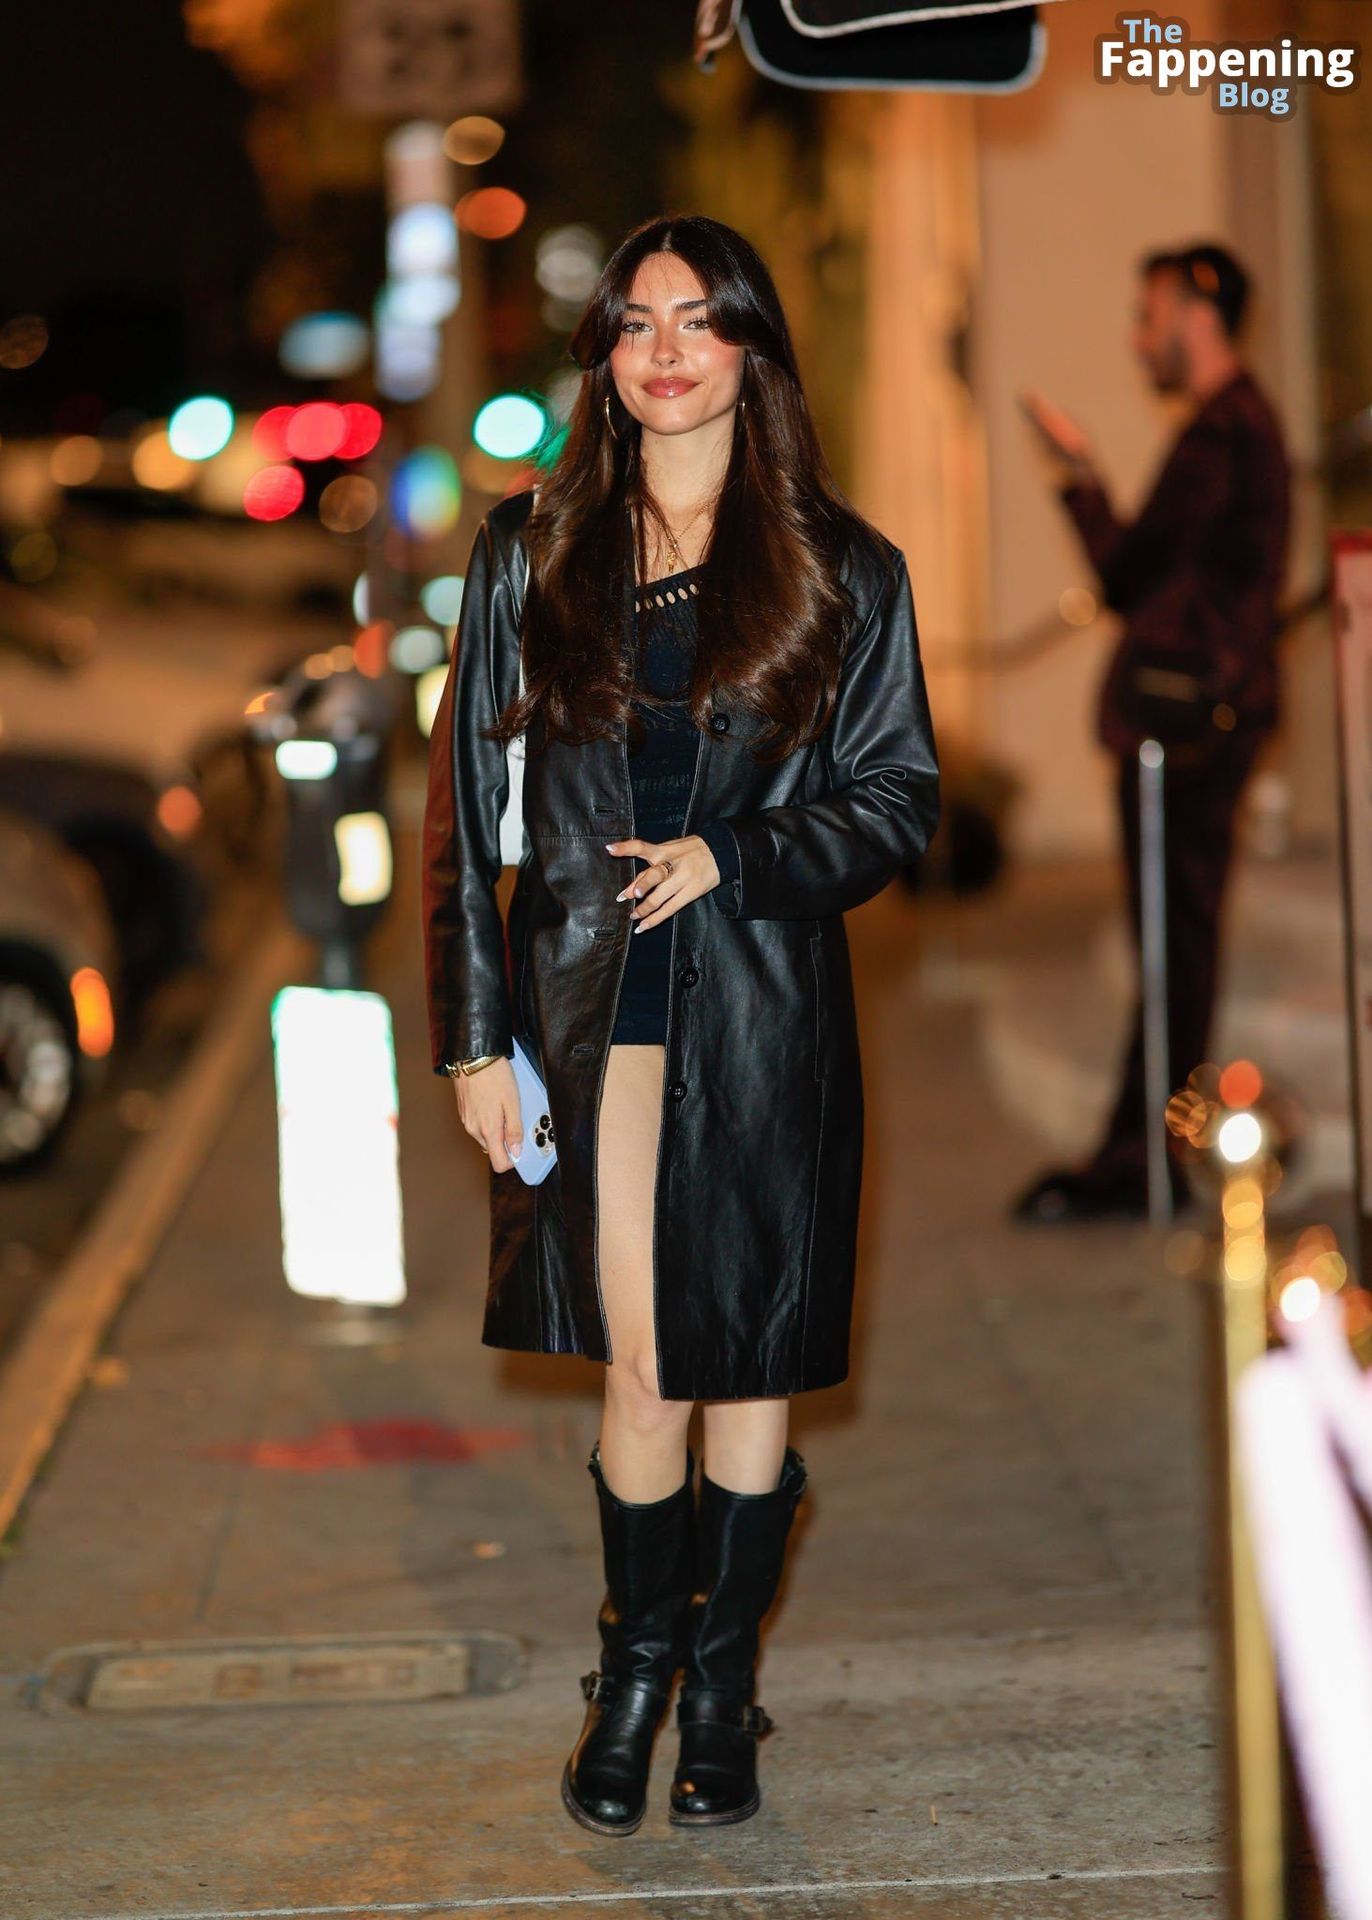 madison-beer-sexy-black-dress-white-fox-sin-city-party-1-thefappeningblog.com_.jpg